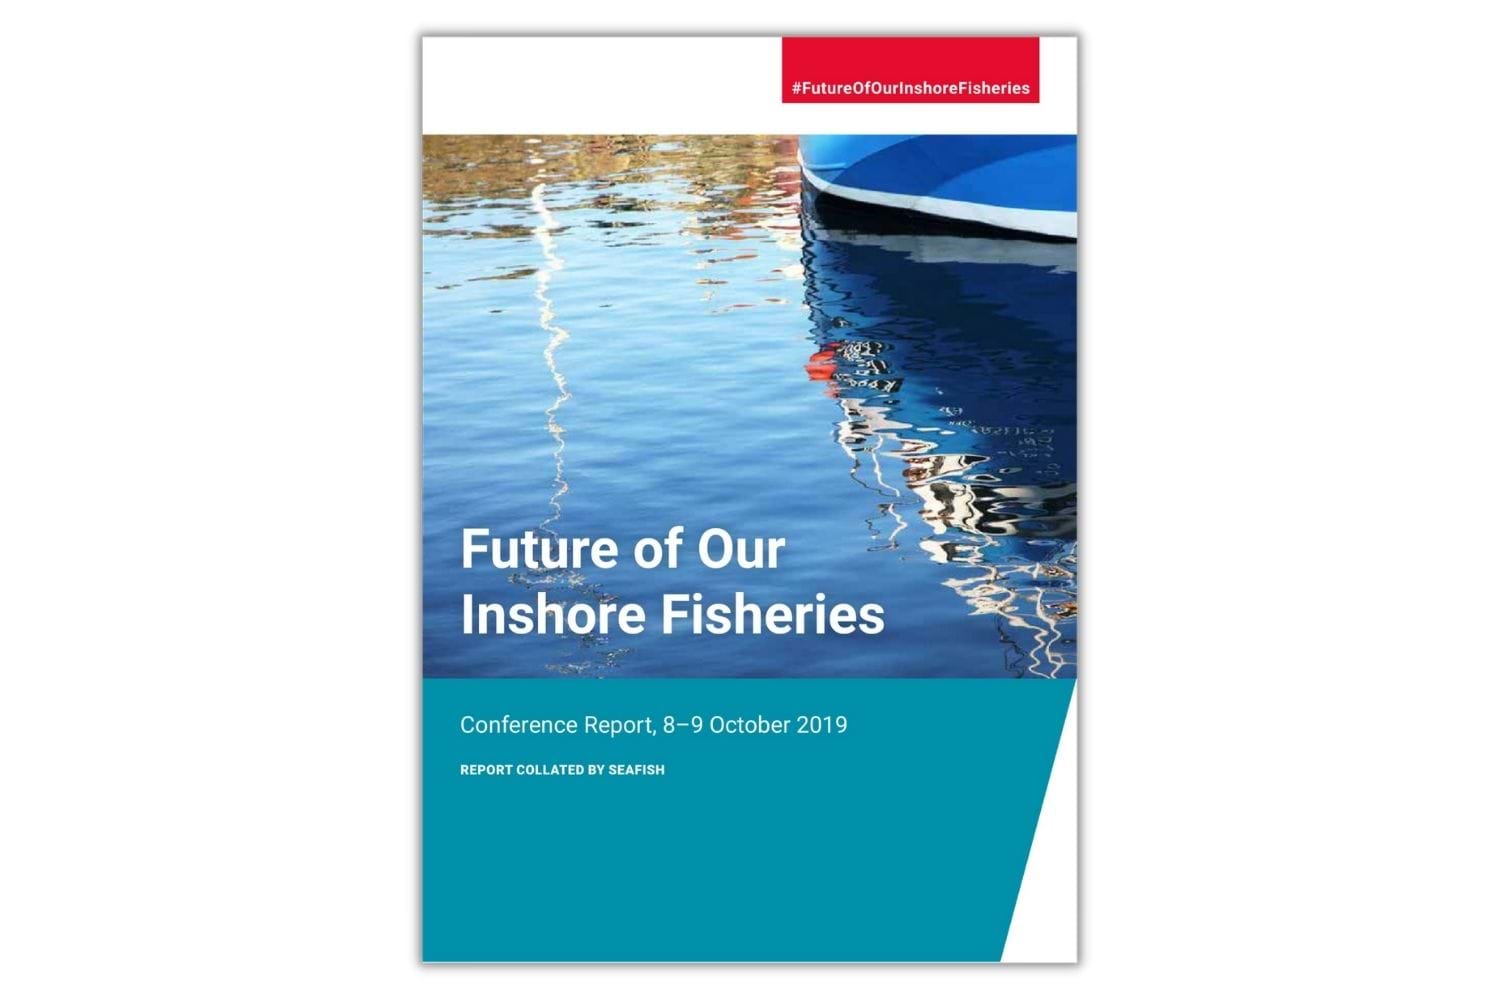 Cover of Future of Our Inshore Fisheries Conference Report, 8-9 October 2019